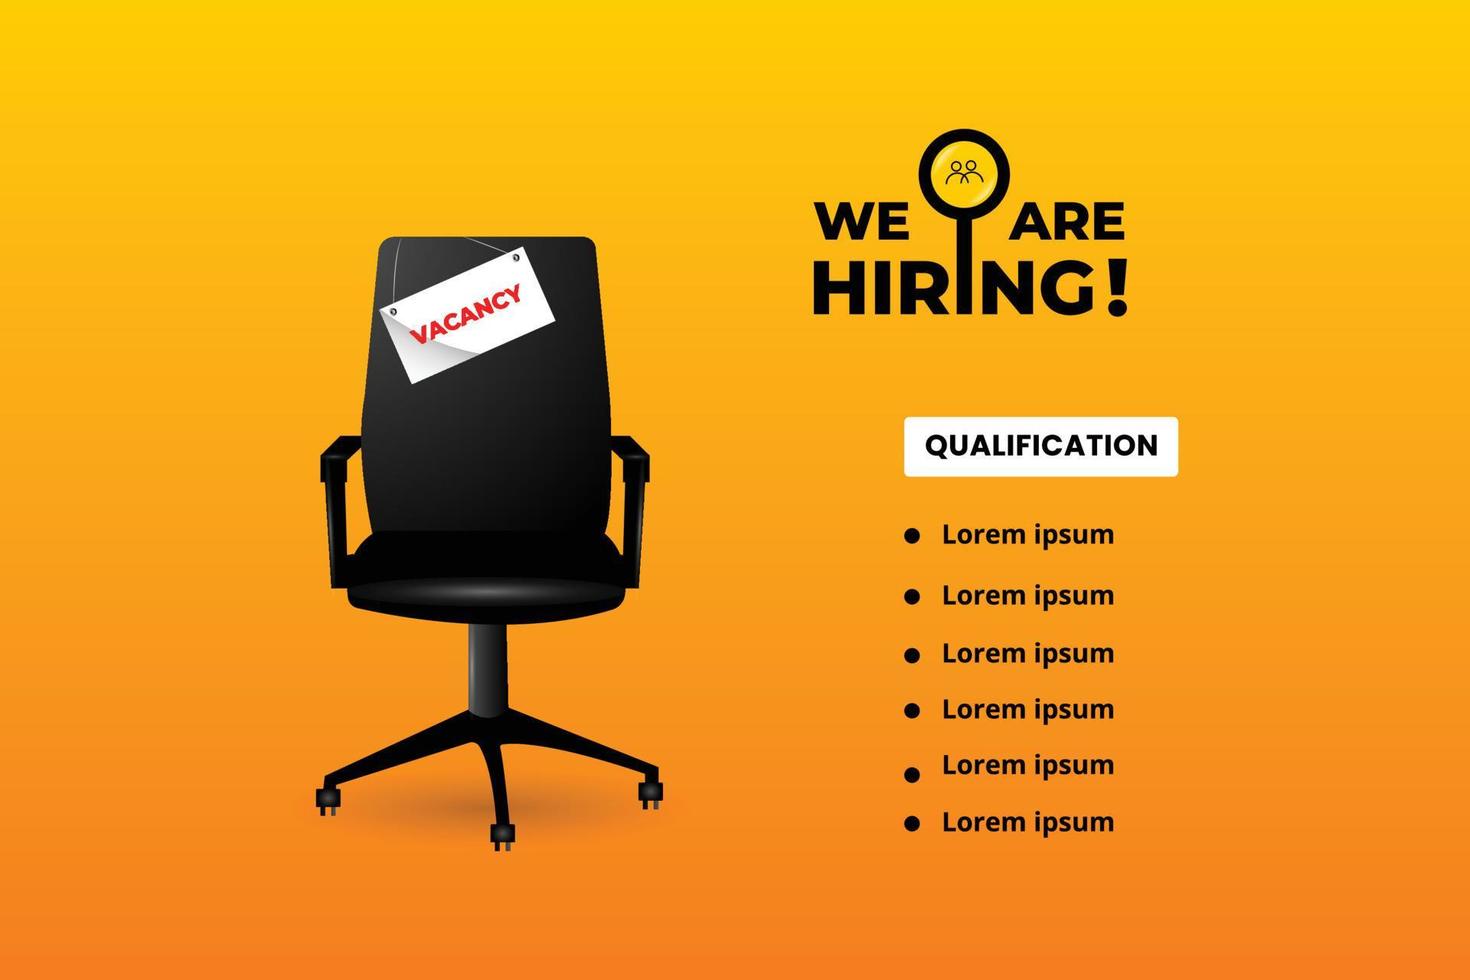 We are hiring announcement banner design vector